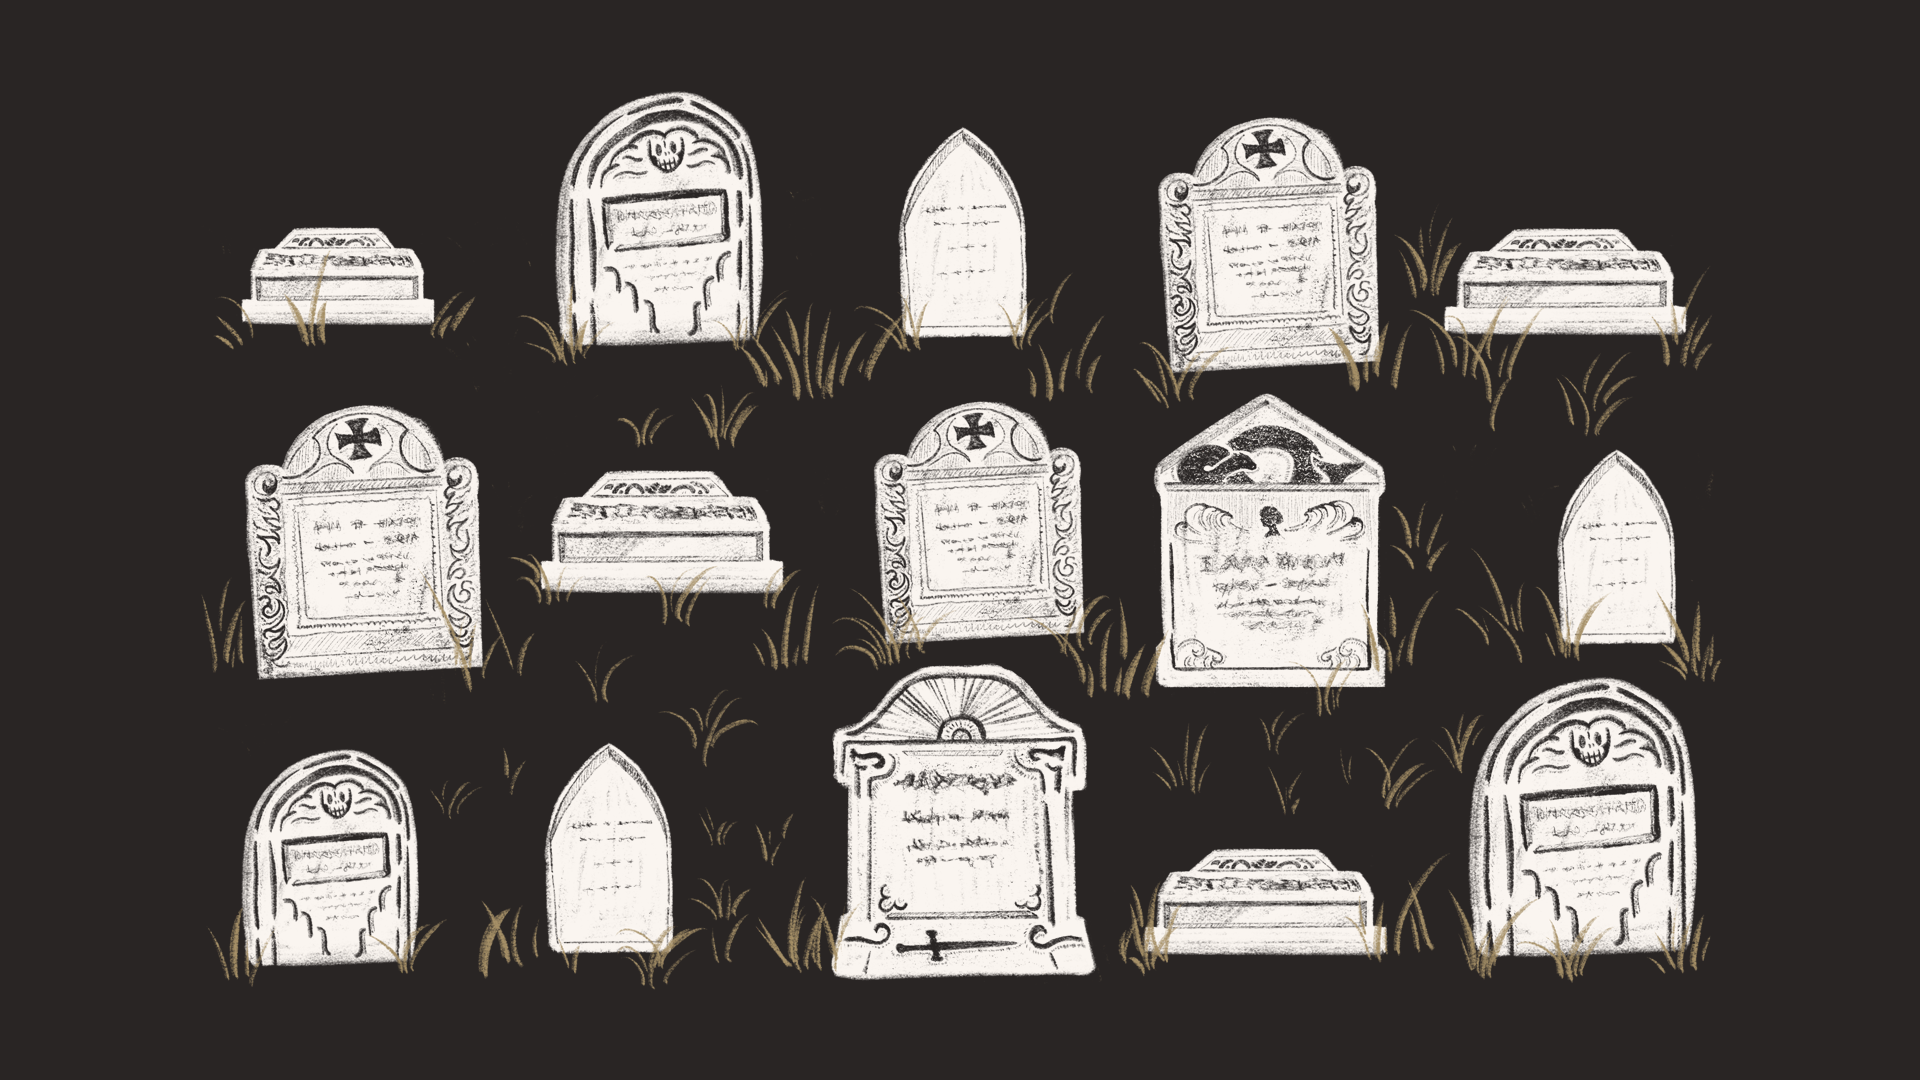 Illustration of various decorated tombstones